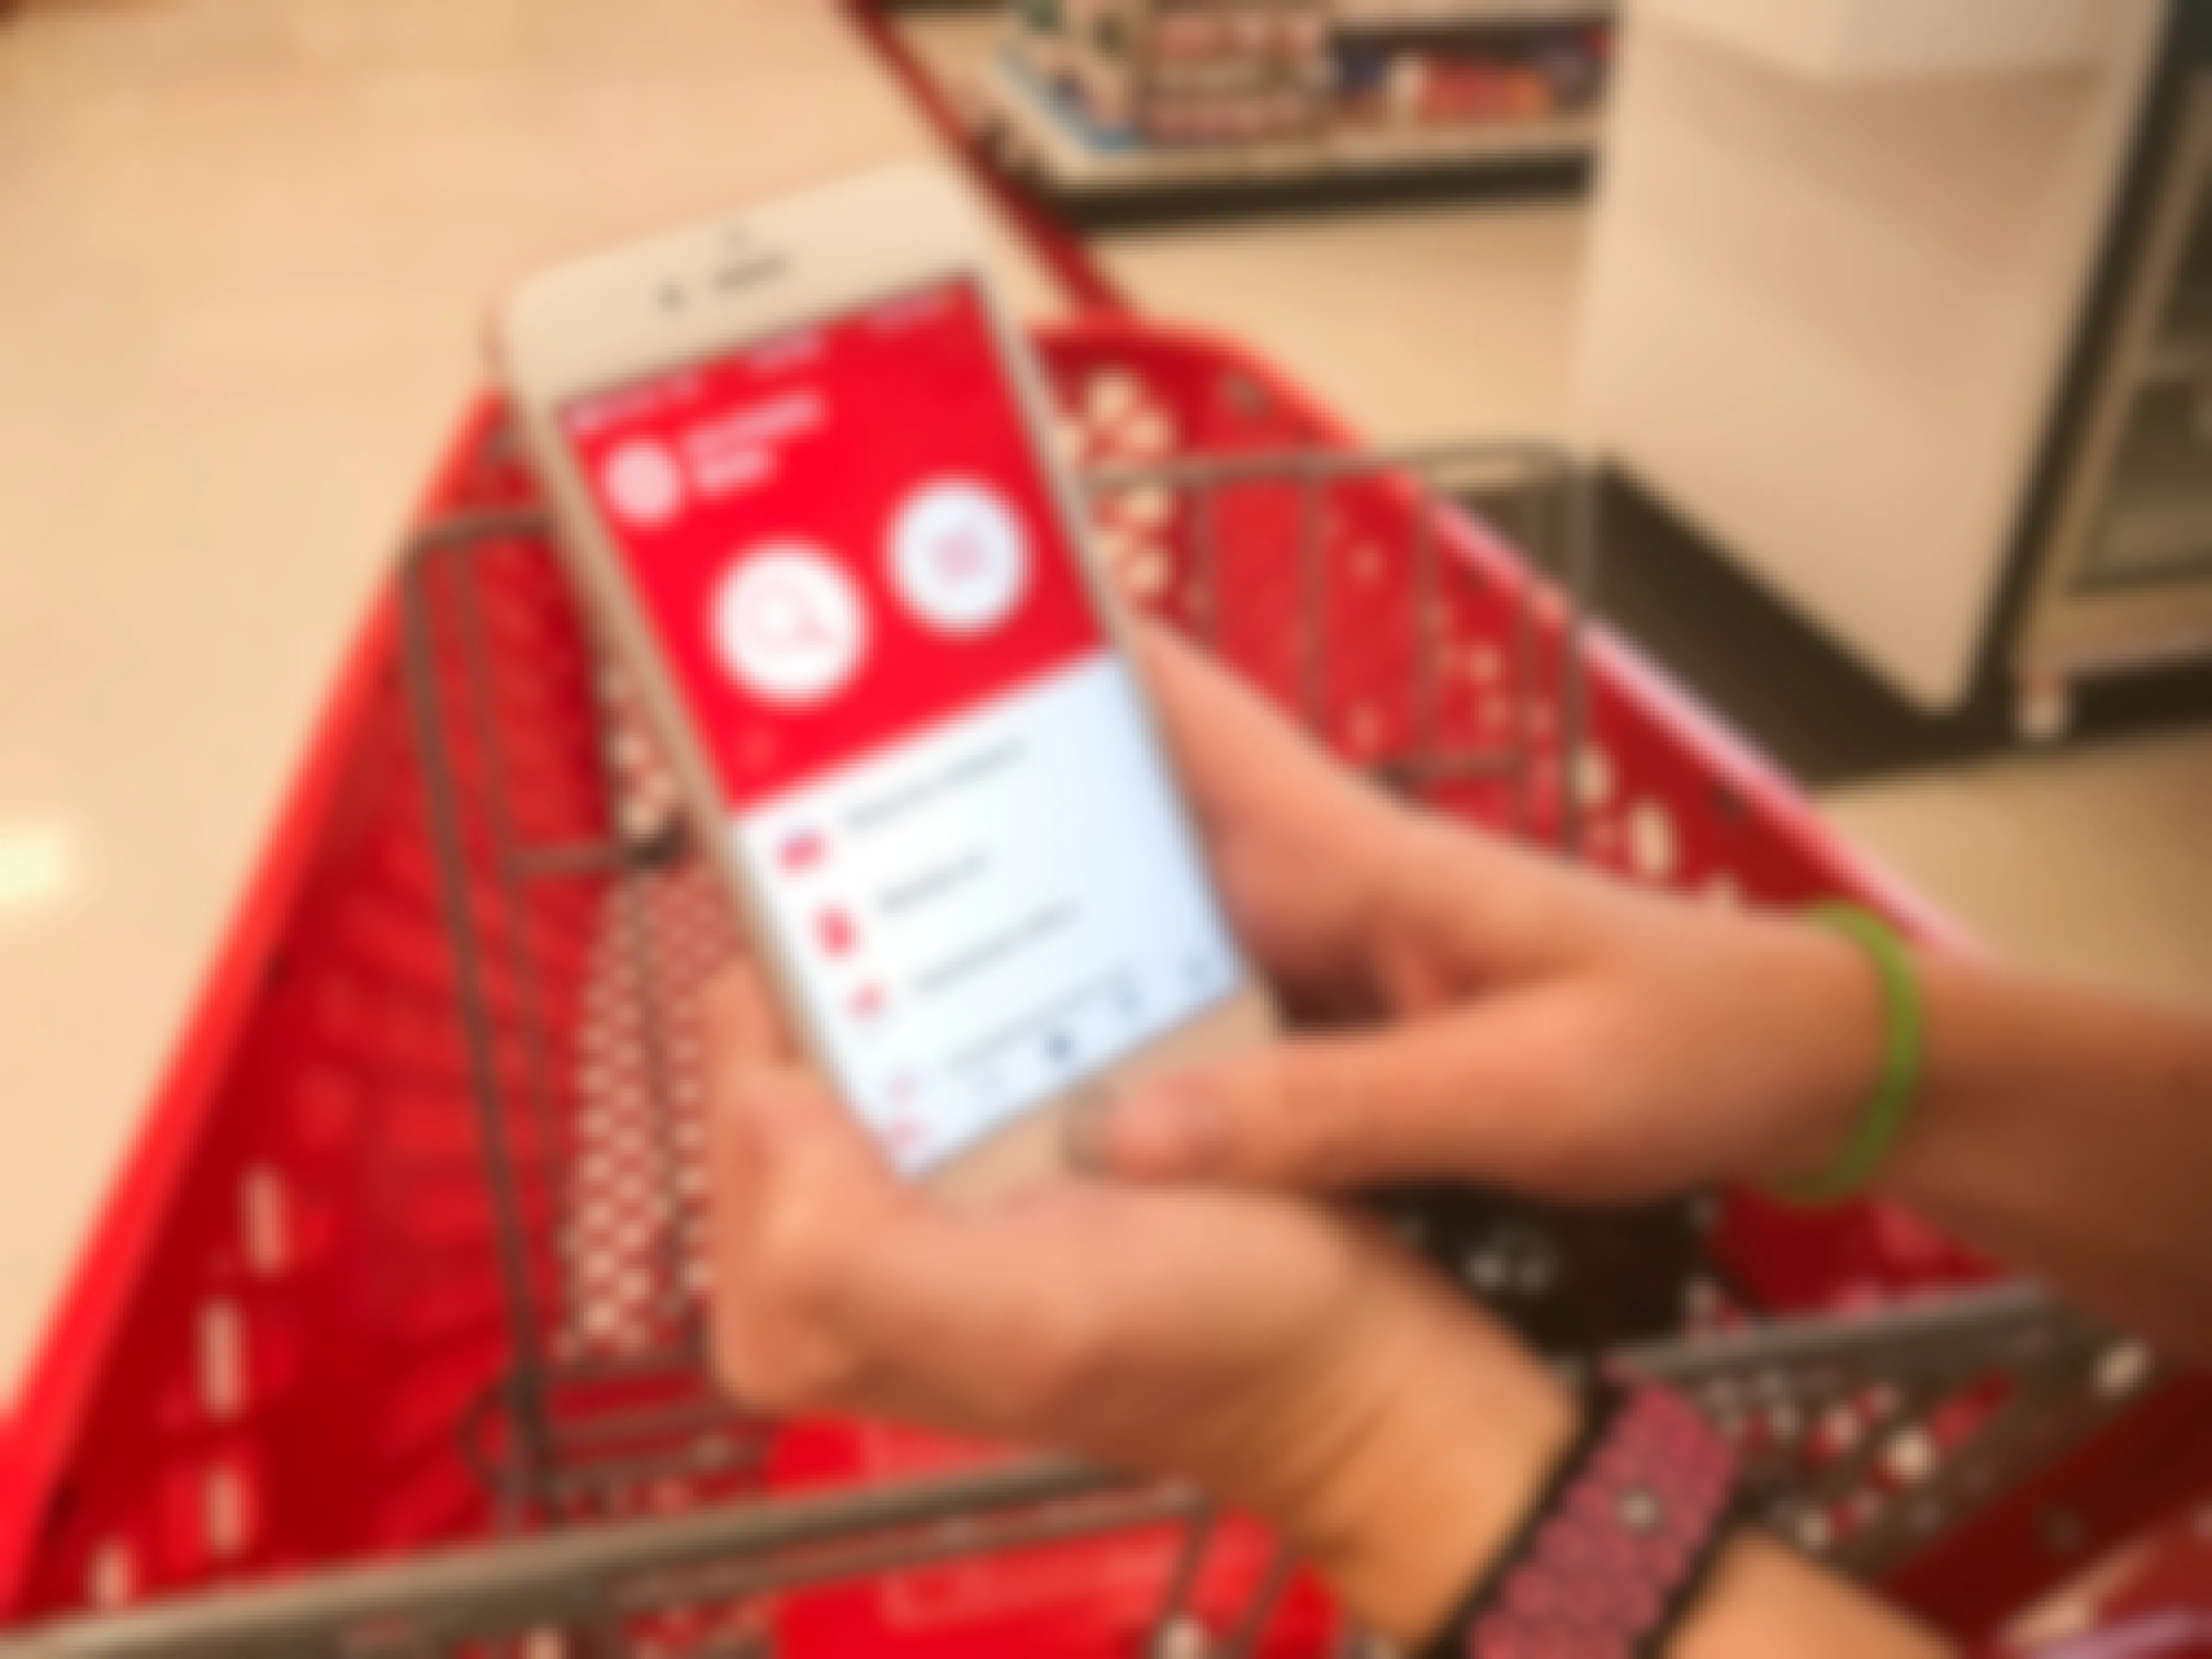 Target Is Spying on You, and You're Paying for It